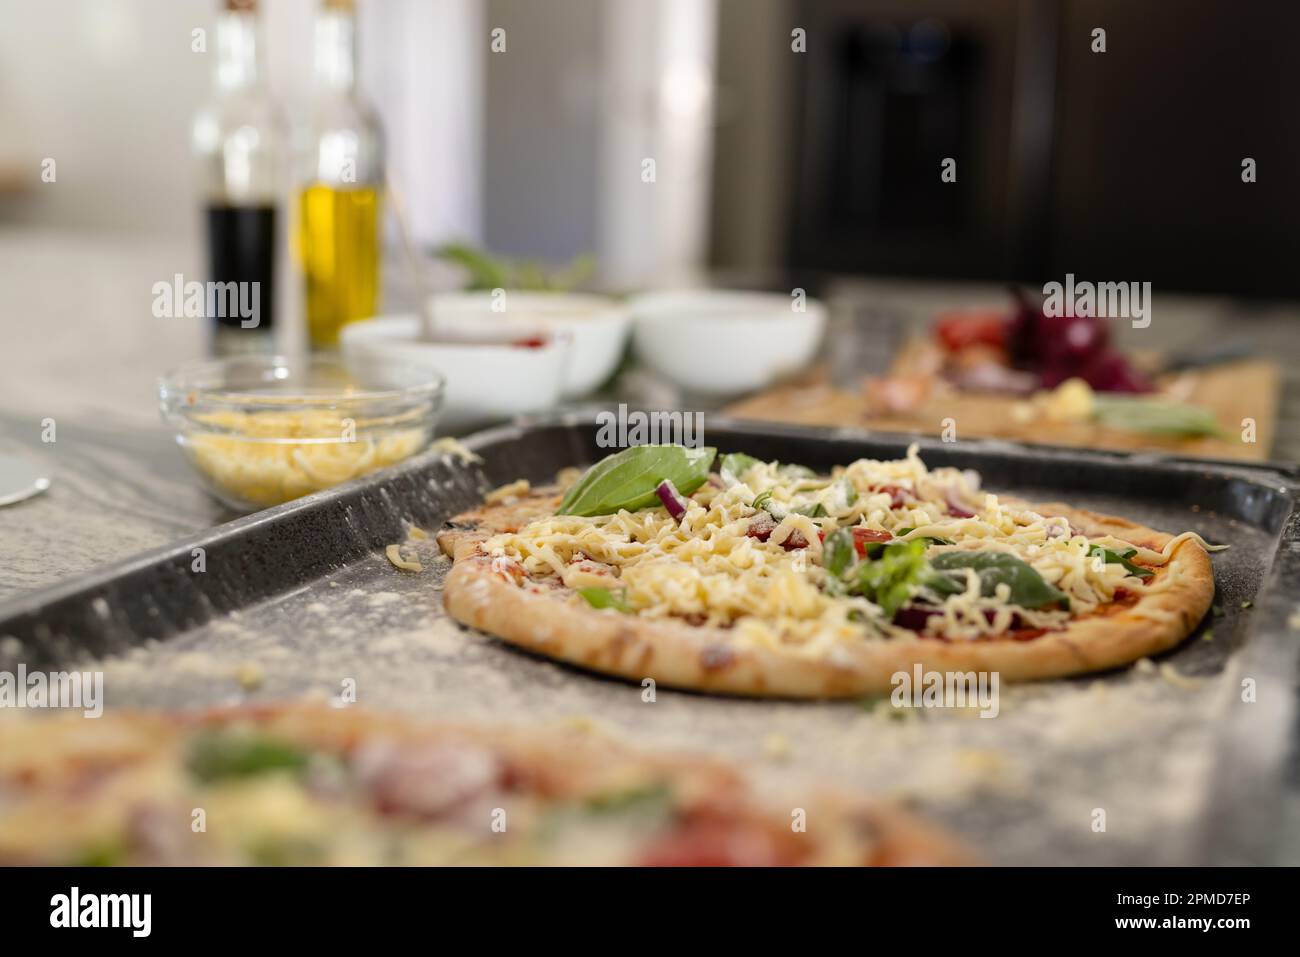 Closeup of pizza garnished with herbs and cheese in tray over kitchen island at home Stock Photo